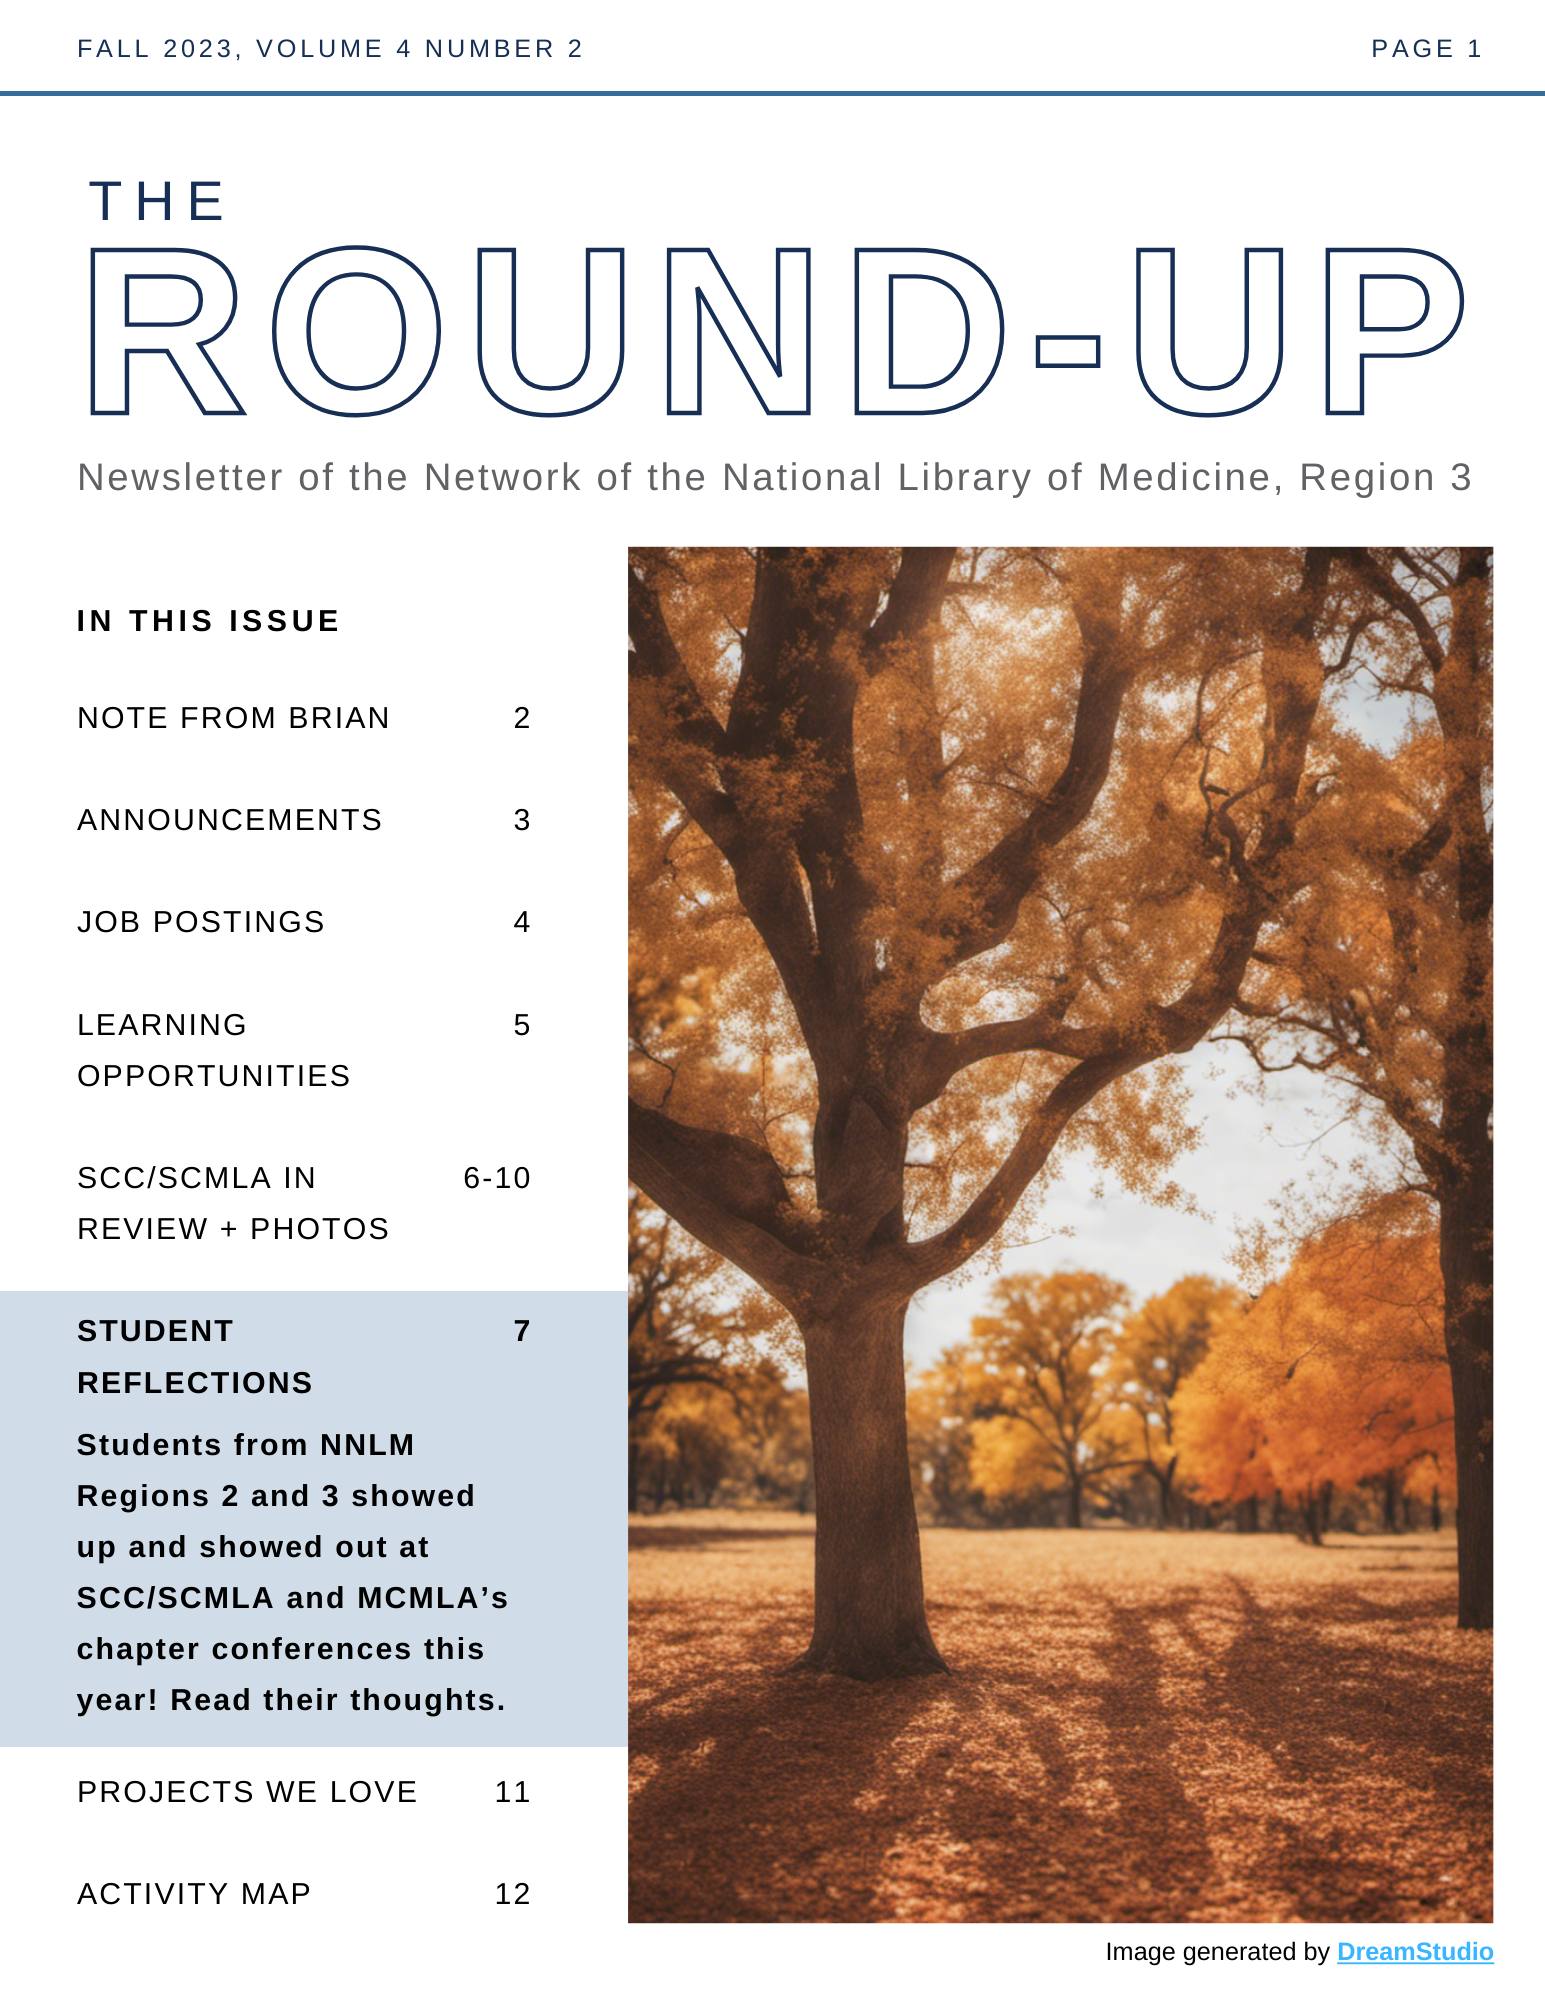 The Round Up - Fall 2023 cover